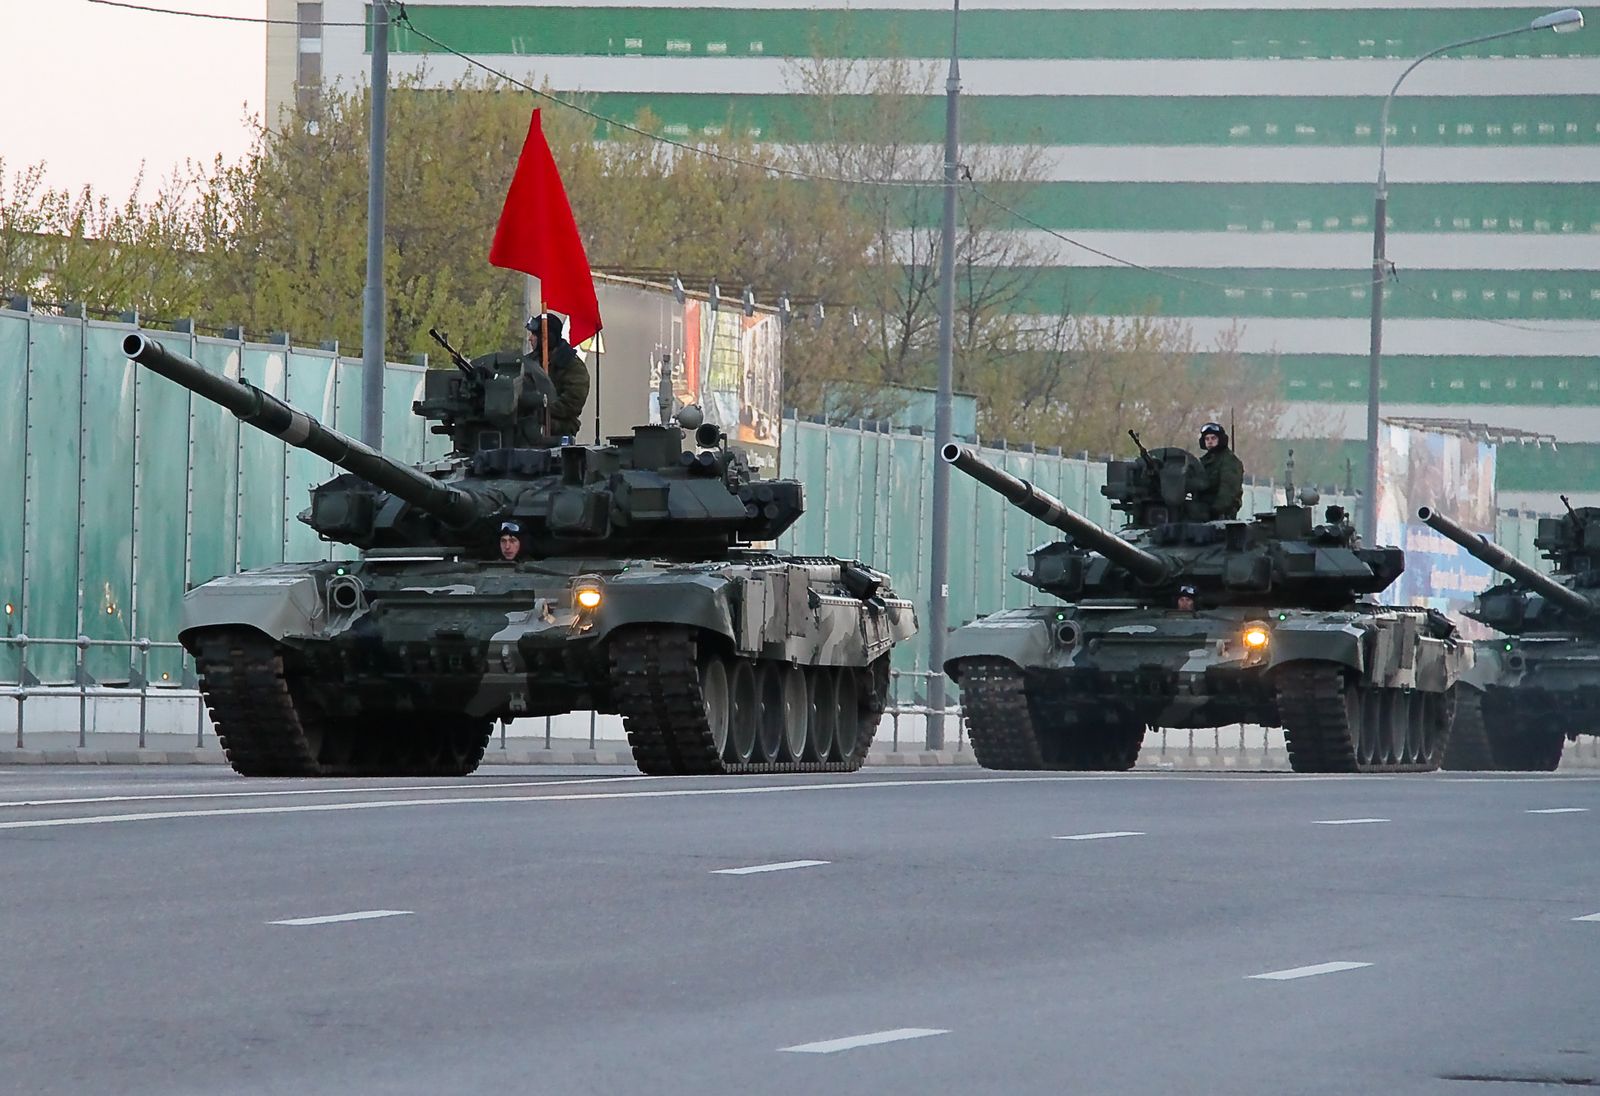 File:Modern T-90 tank of the Russian Army.jpg - Wikimedia Commons